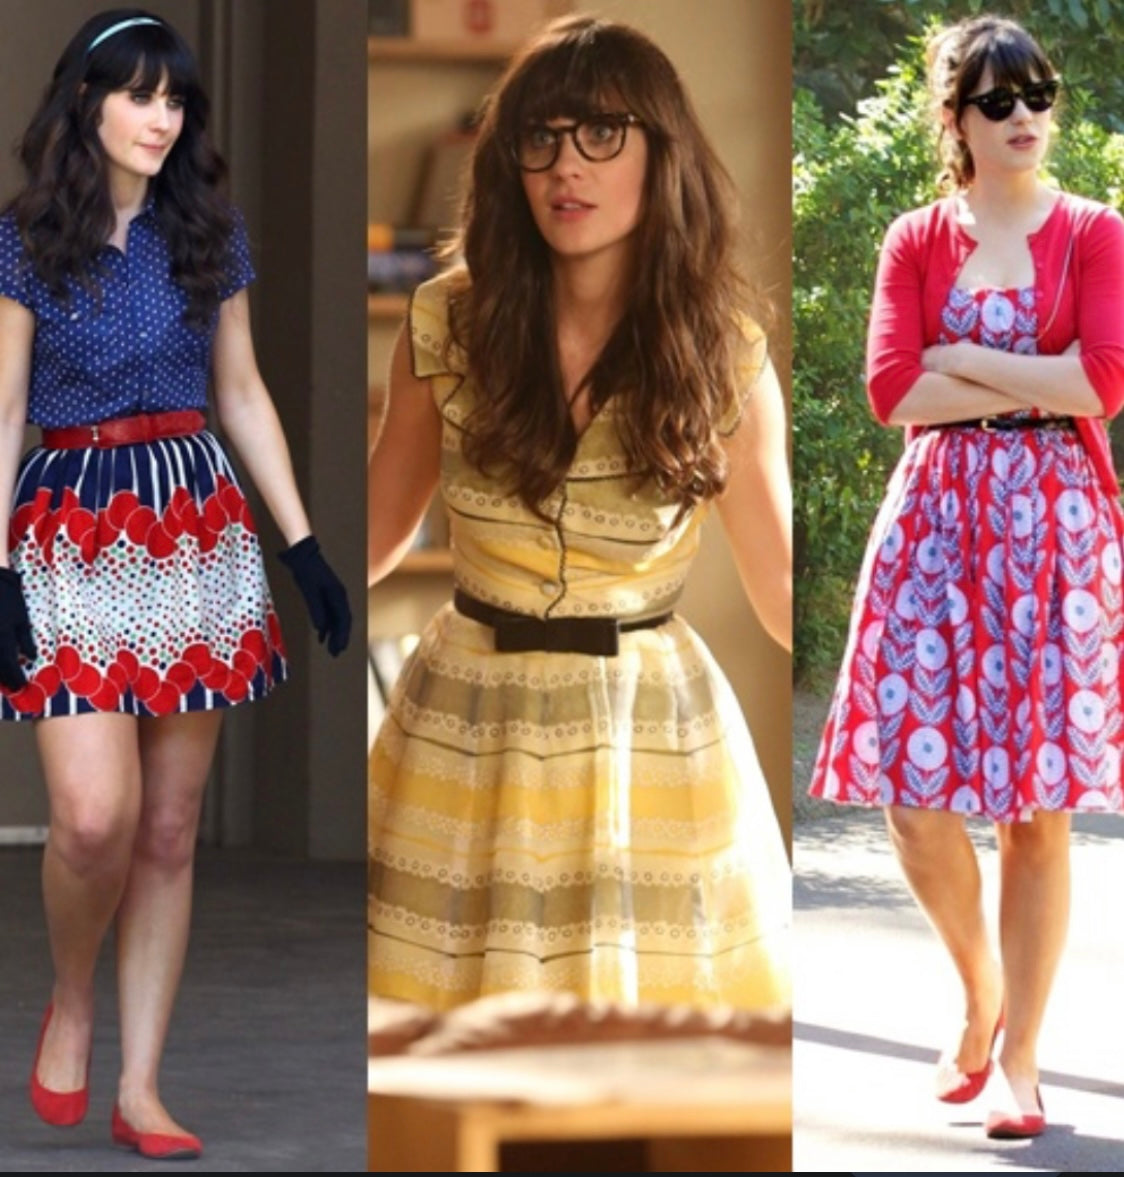 NEW GIRL: Jessica Day's Footwear (7/8)